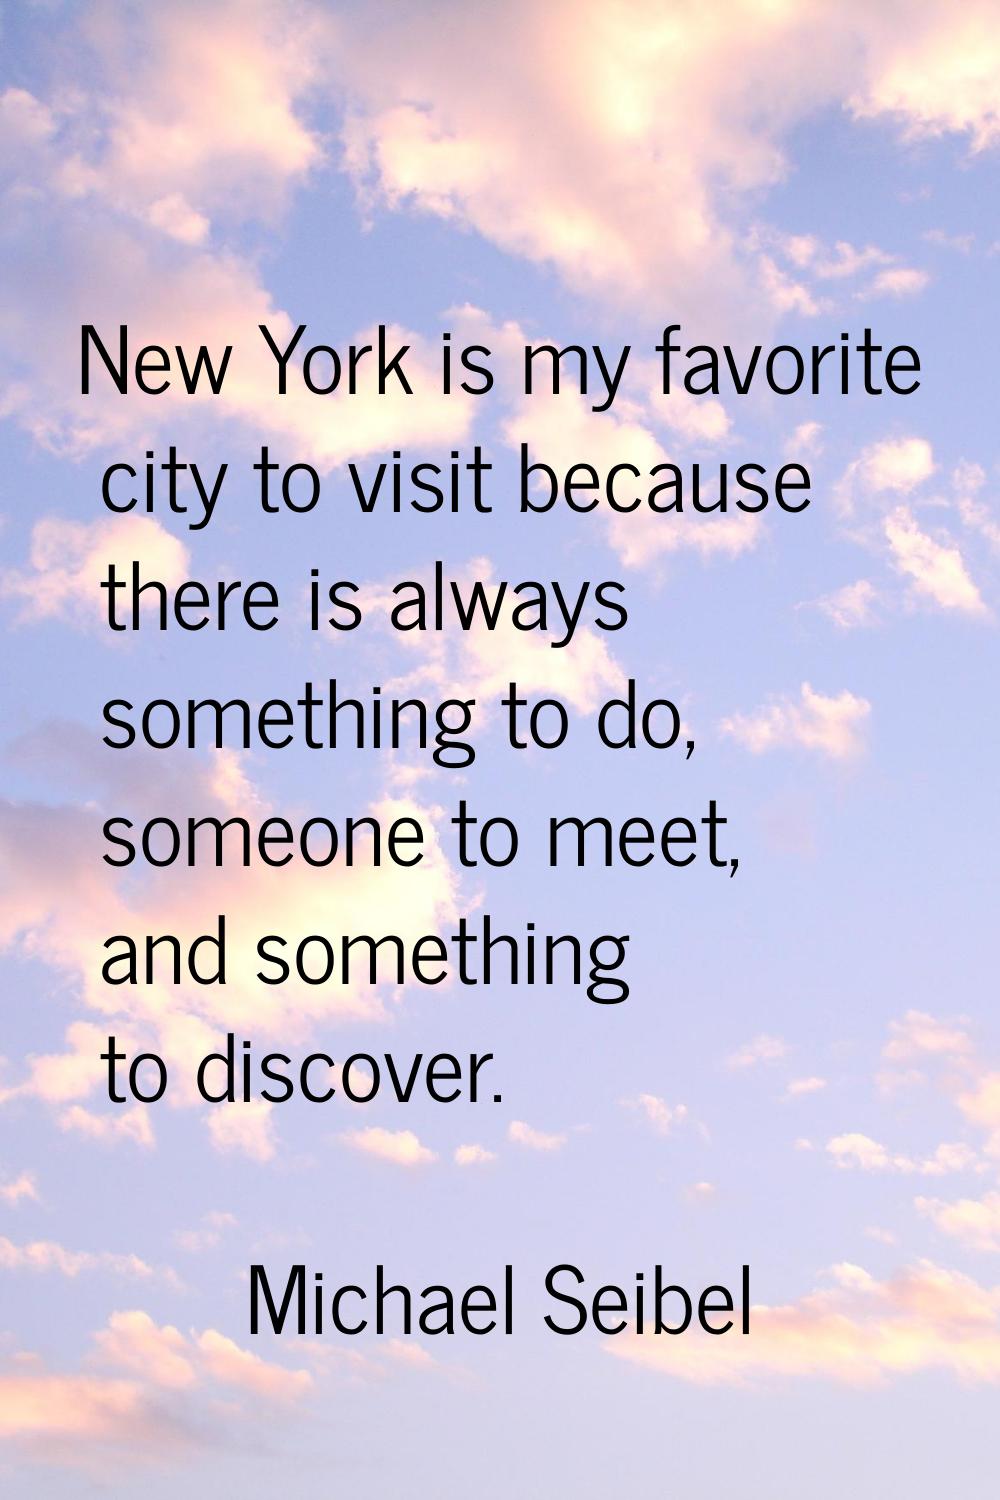 New York is my favorite city to visit because there is always something to do, someone to meet, and